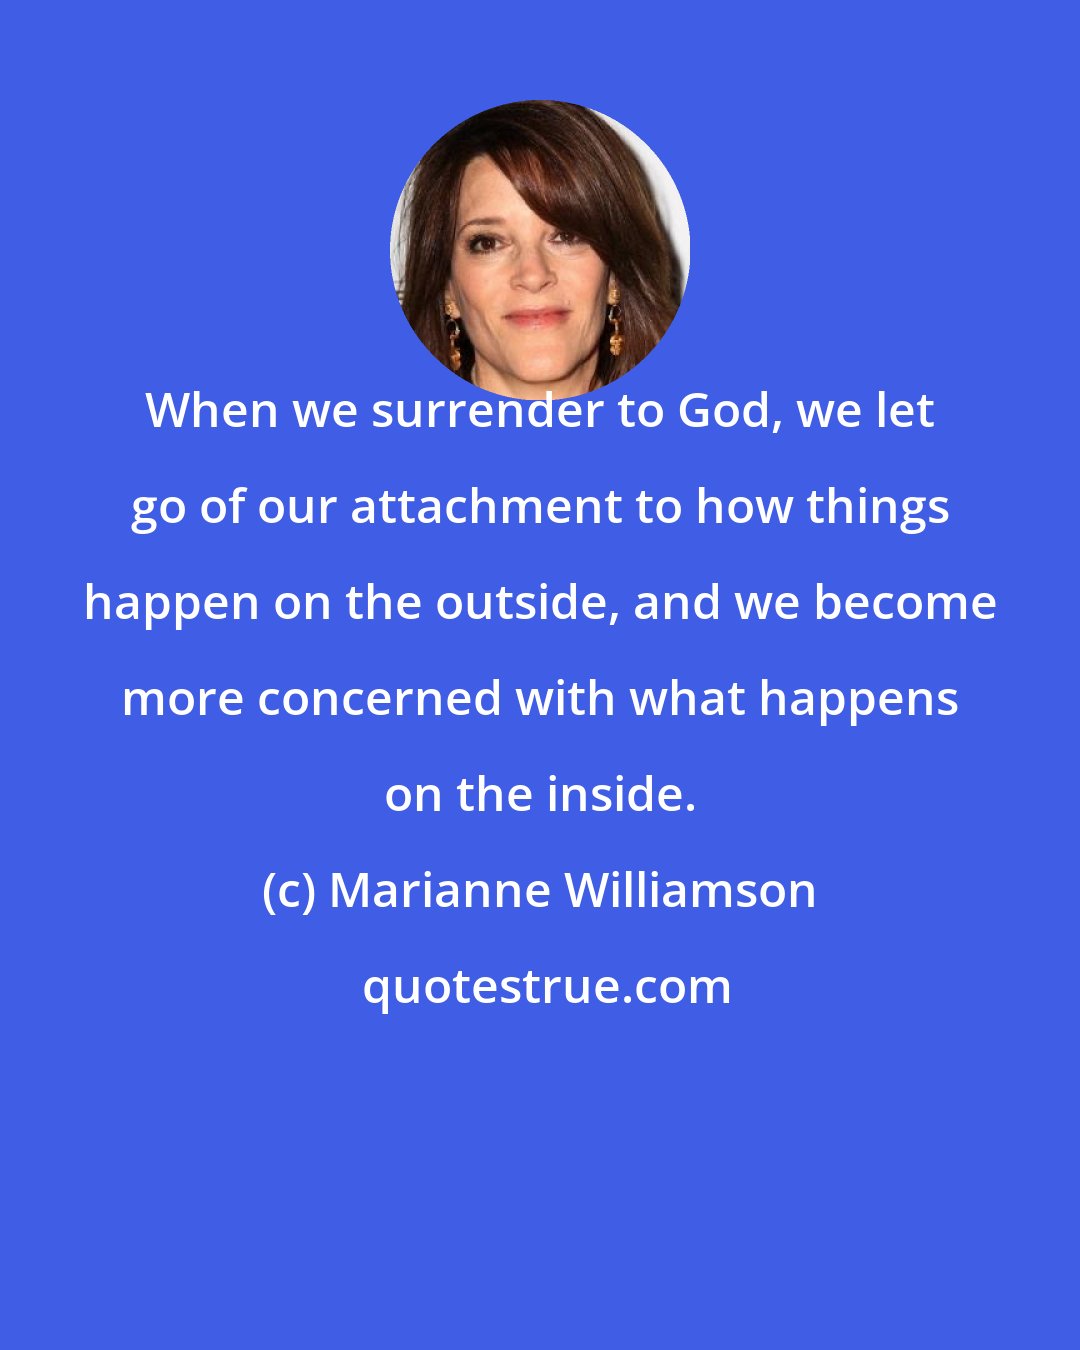 Marianne Williamson: When we surrender to God, we let go of our attachment to how things happen on the outside, and we become more concerned with what happens on the inside.